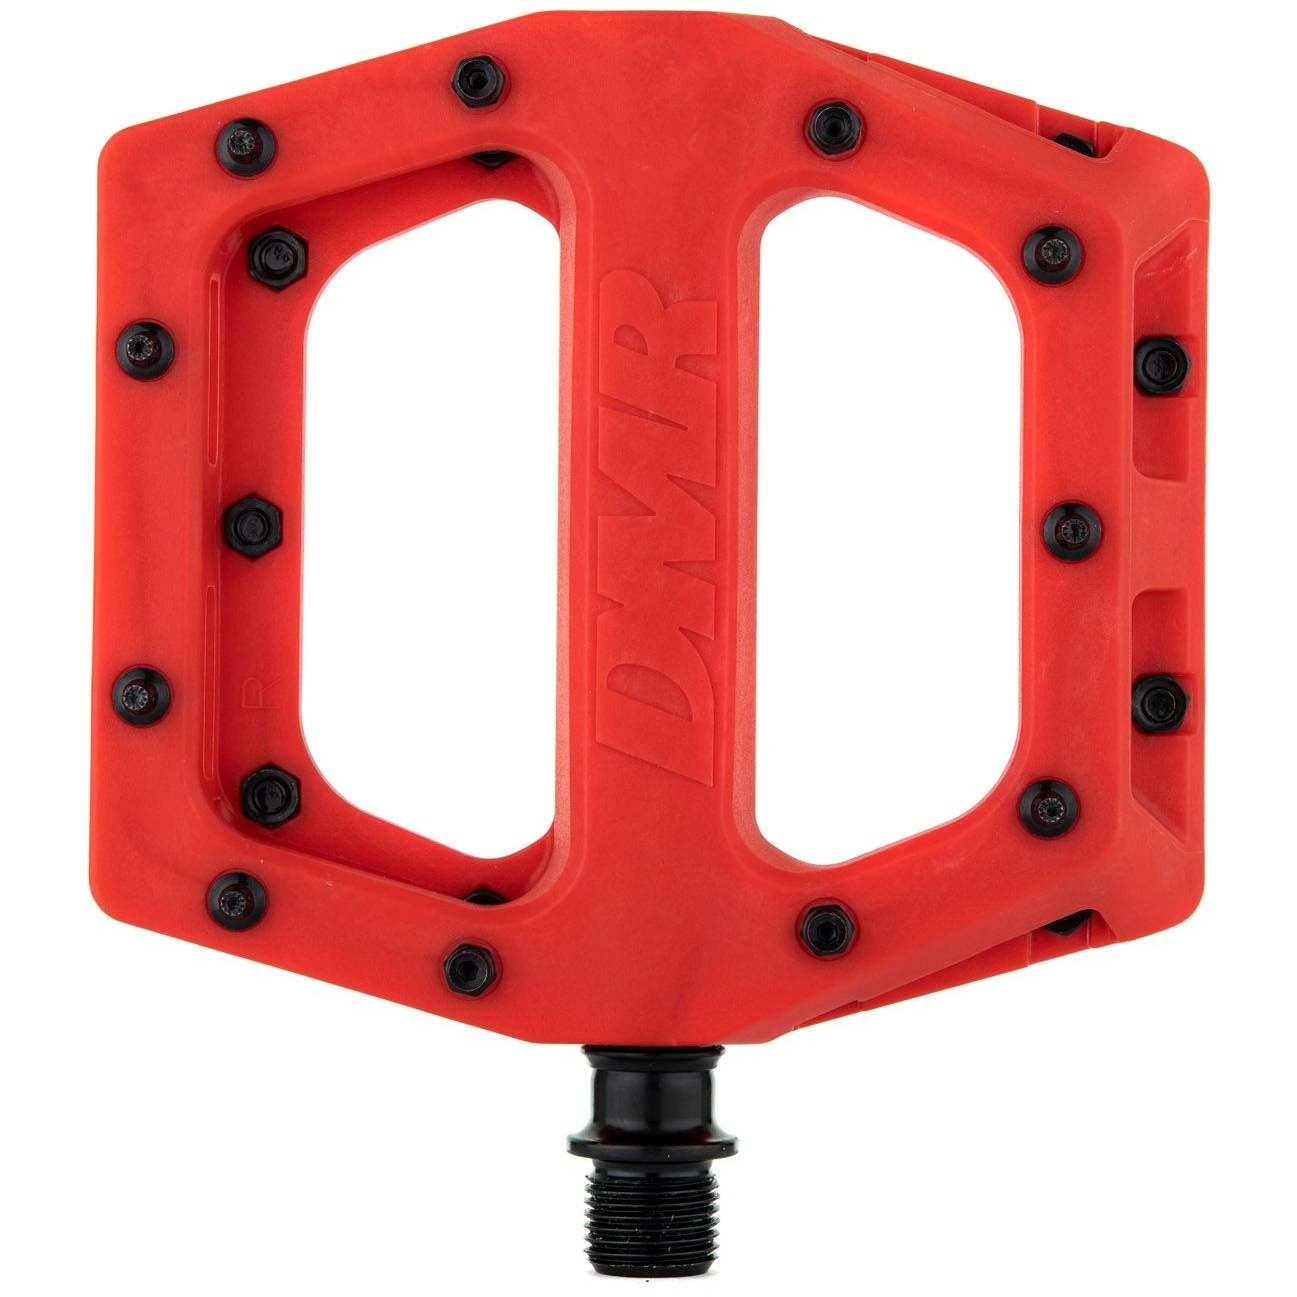 Picture of DMR V11 Flat Pedals - red